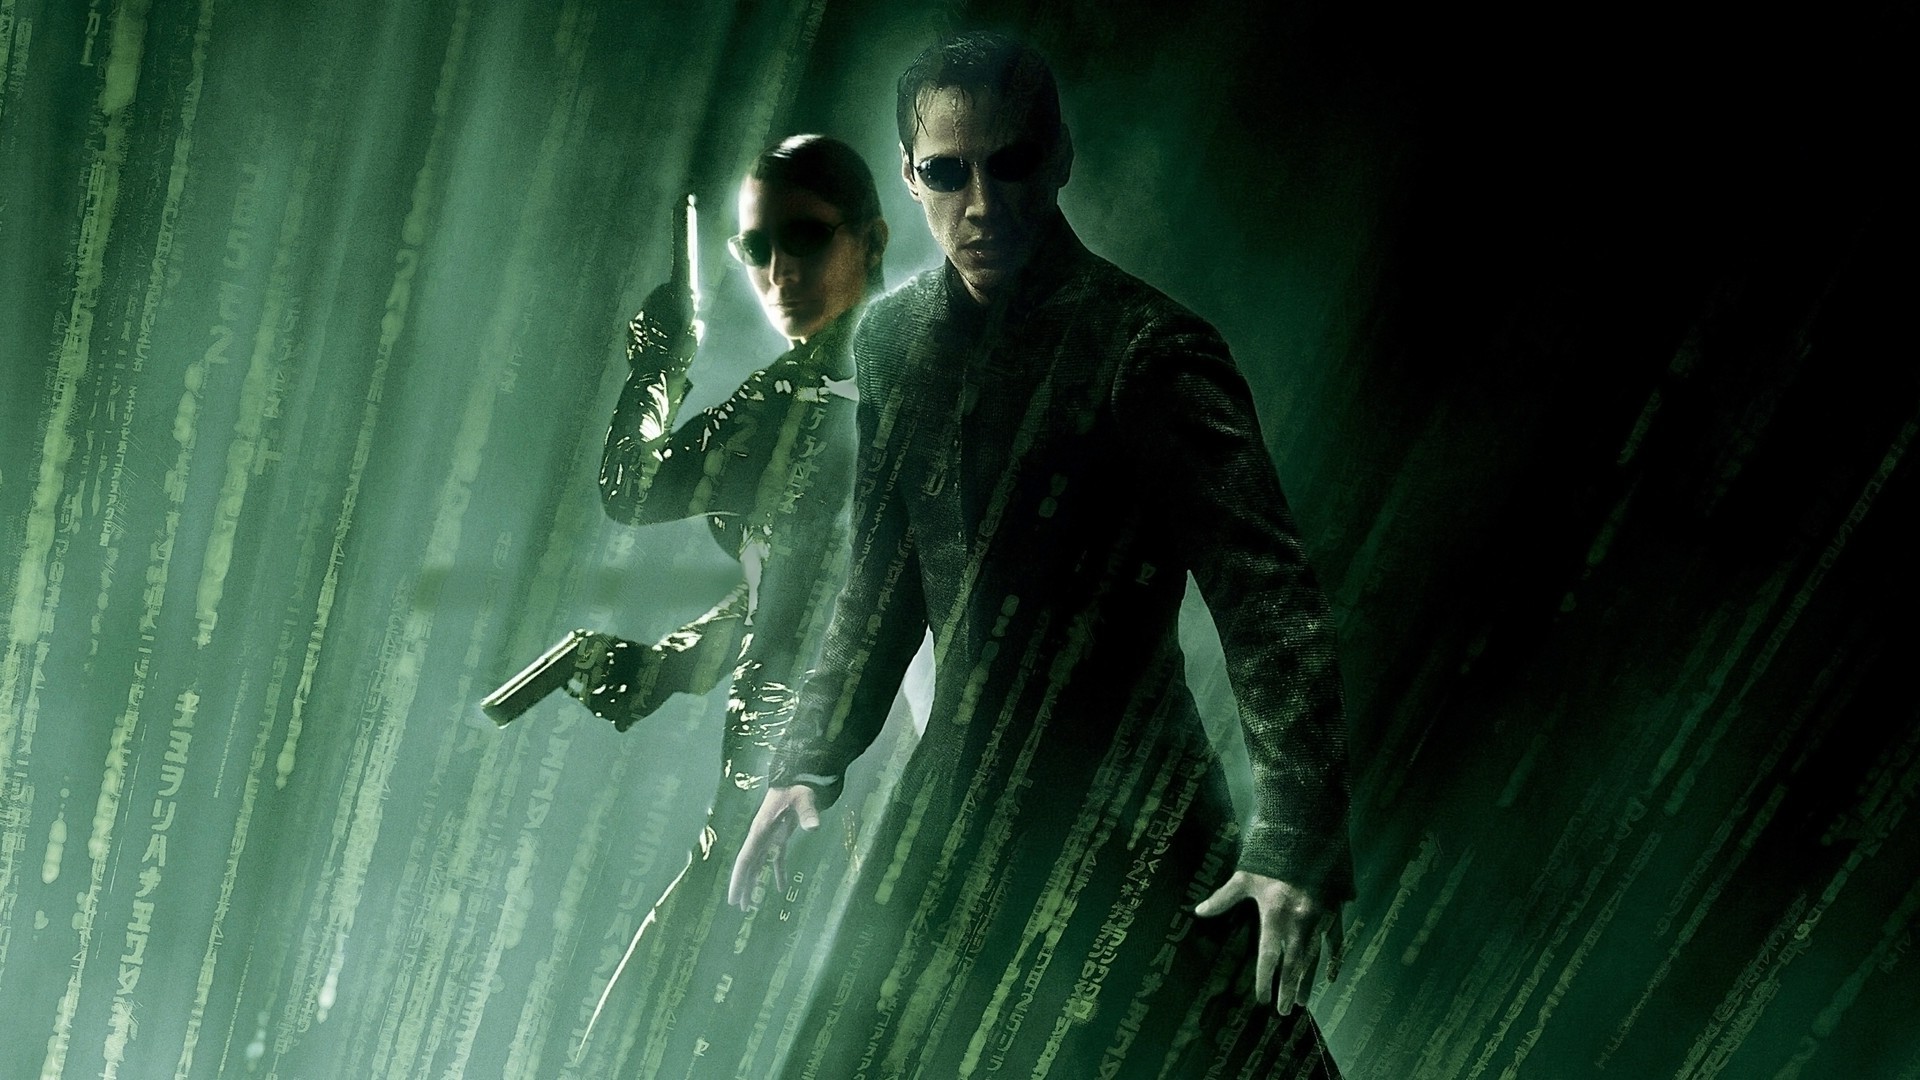 The Matrix, Movies, The Matrix Revolutions, Neo, Keanu Reeves, Carrie Anne Moss, Trinity Wallpaper